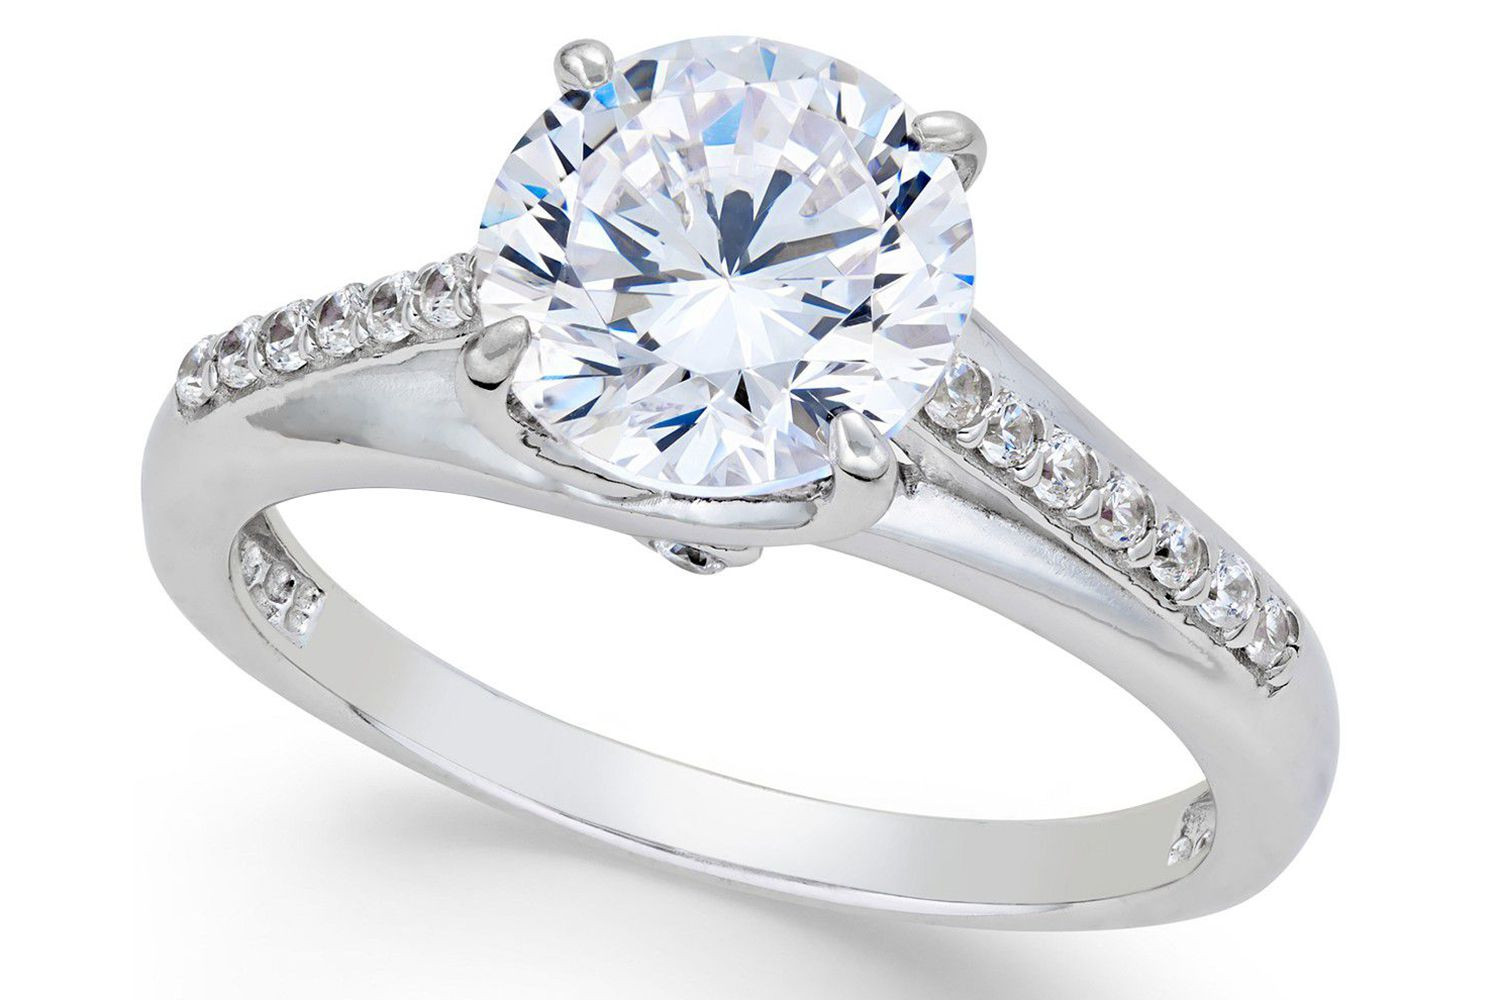 Wedding Rings Com
 The 6 Best Fake Engagement Rings to Wear When You Travel